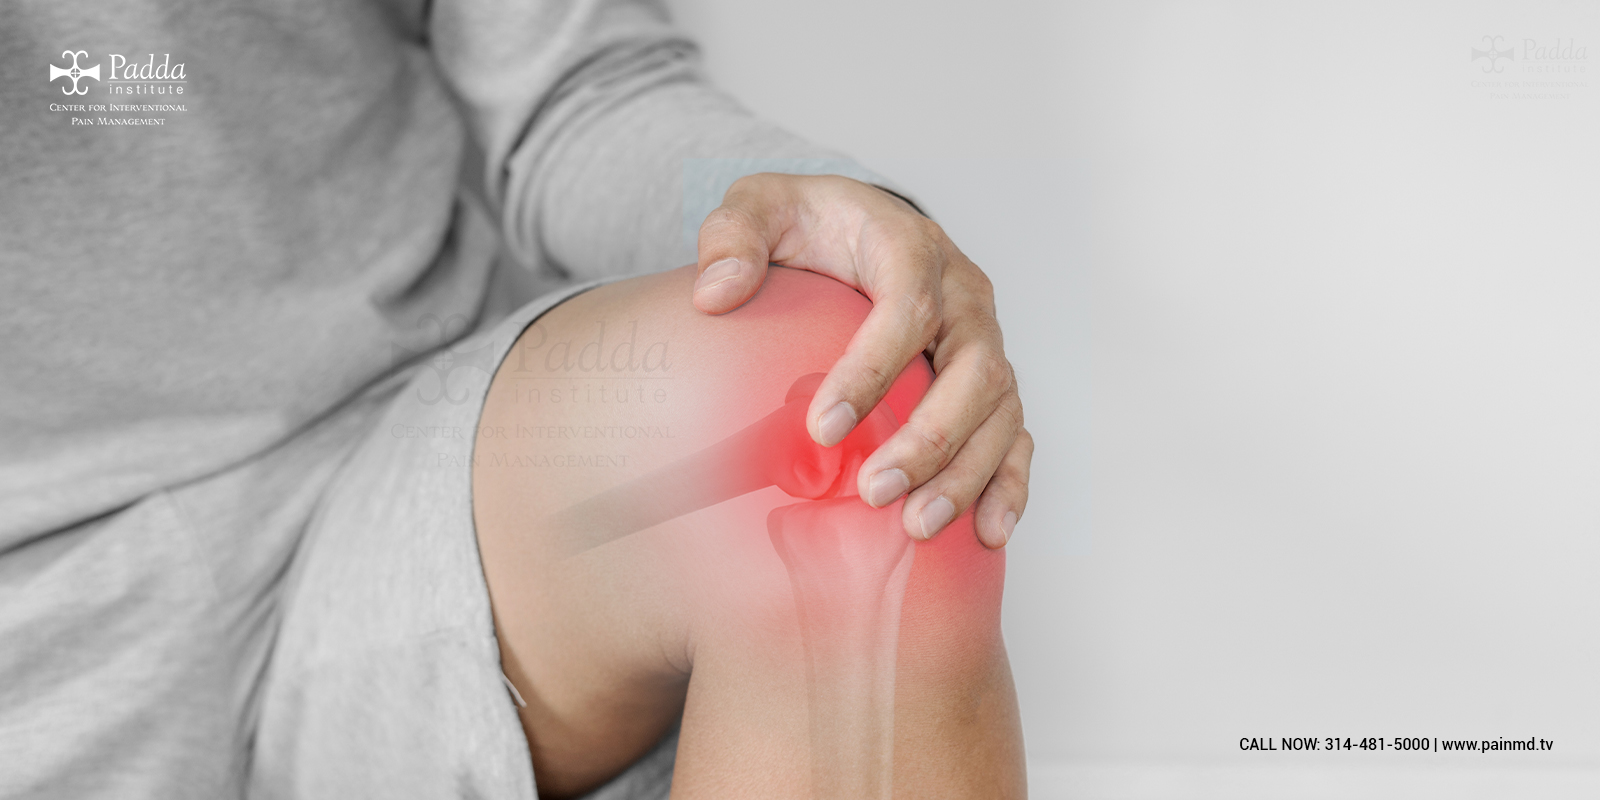 Aggressively Treating Inflammation May Lead to Chronic Pain